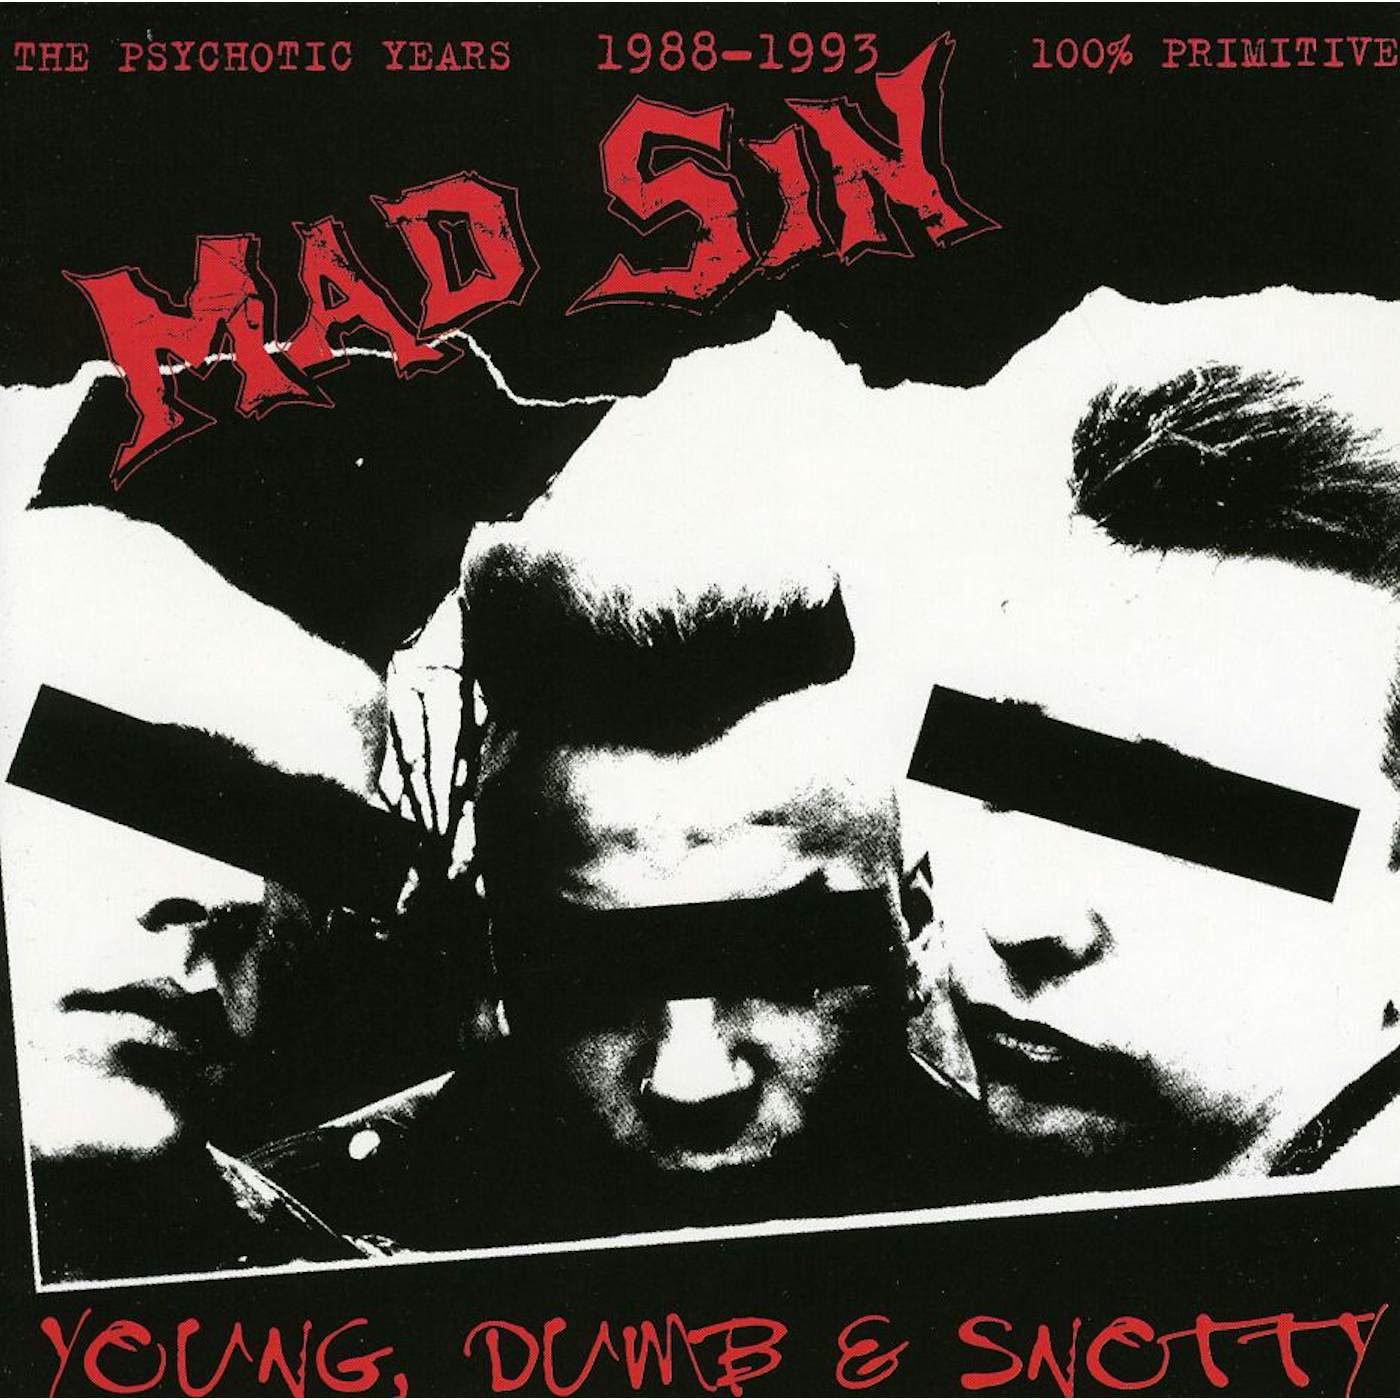 Mad Sin YOUNG DUMB & SNOTTY CD